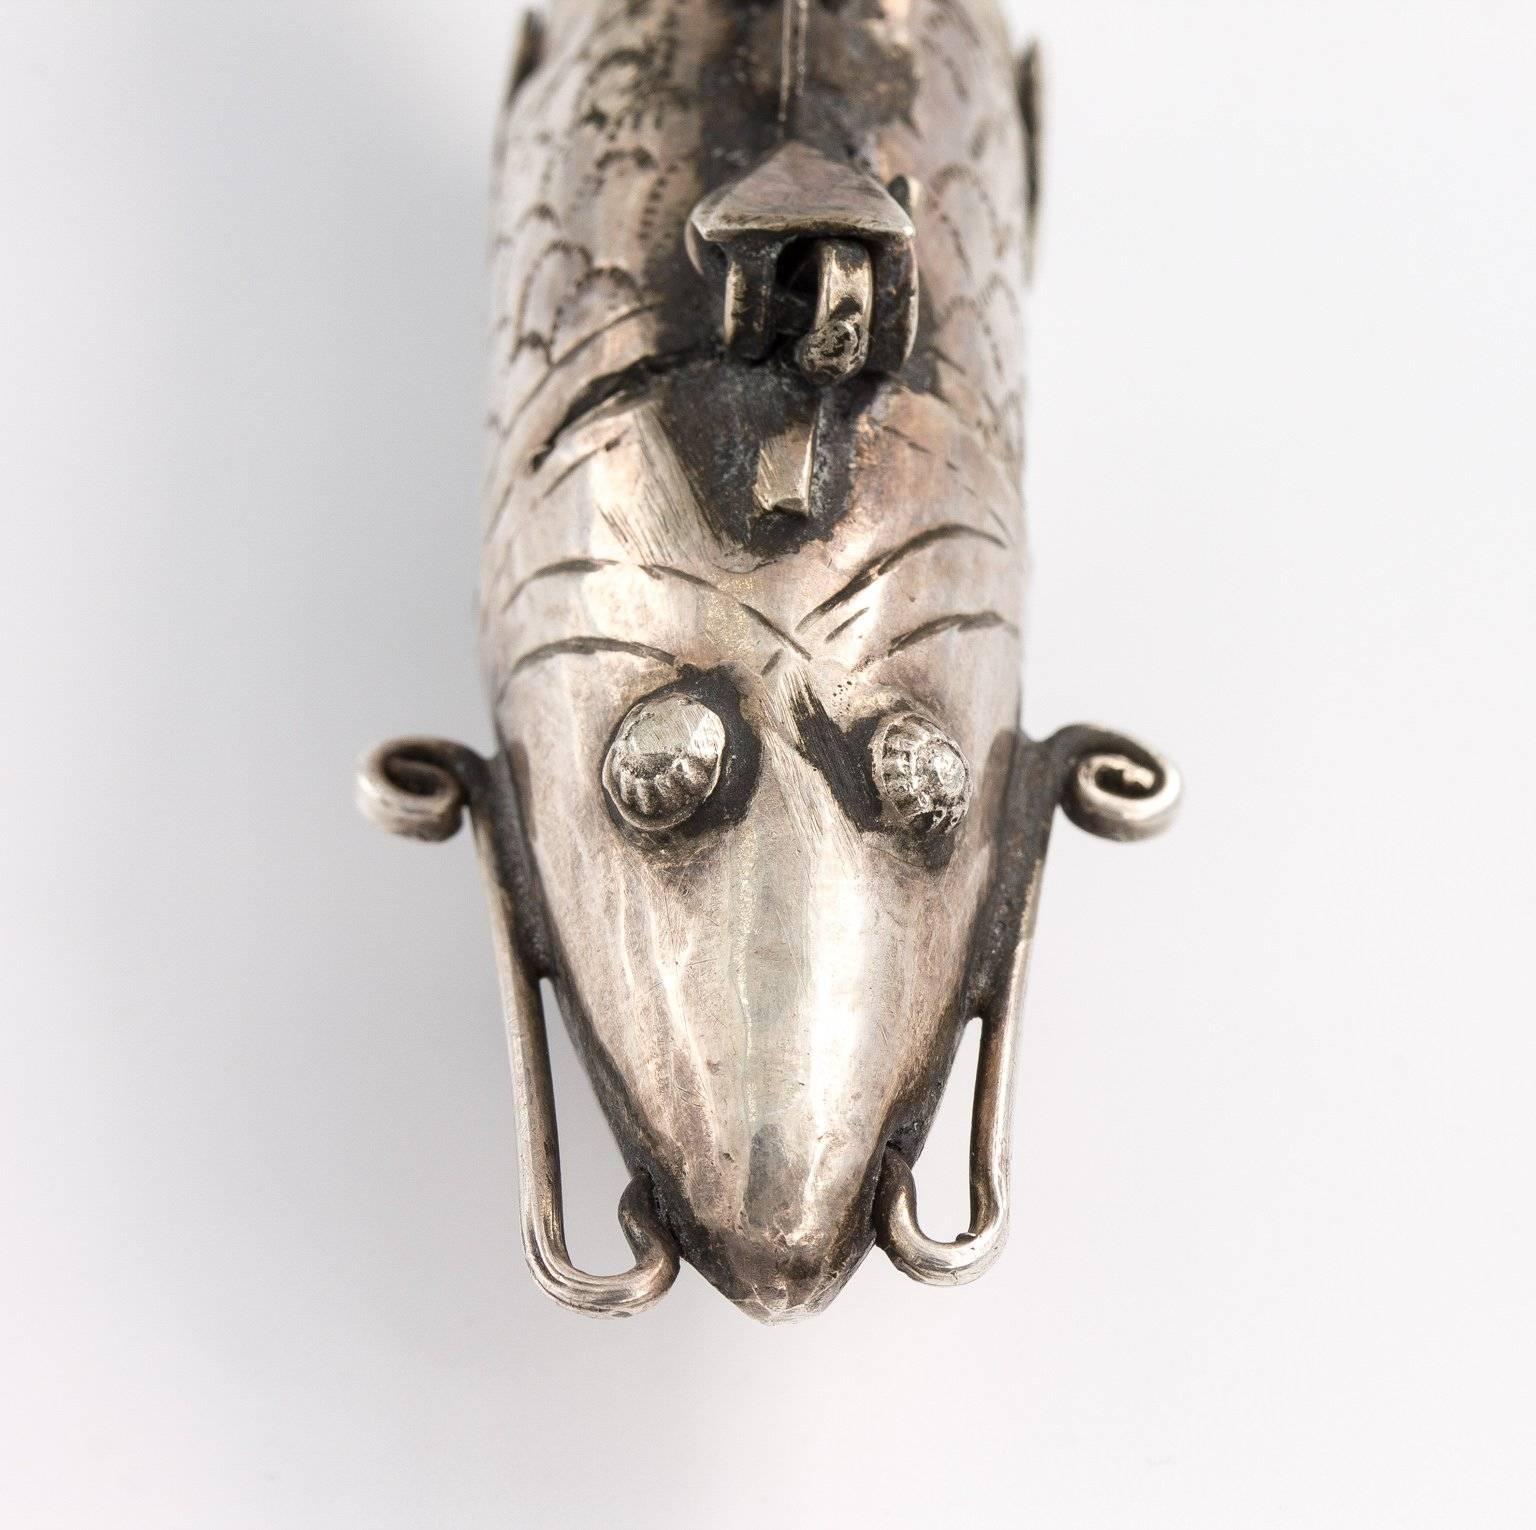 A fine quality antique articulated fish form spice box in sterling silver. Most likely 19th century.